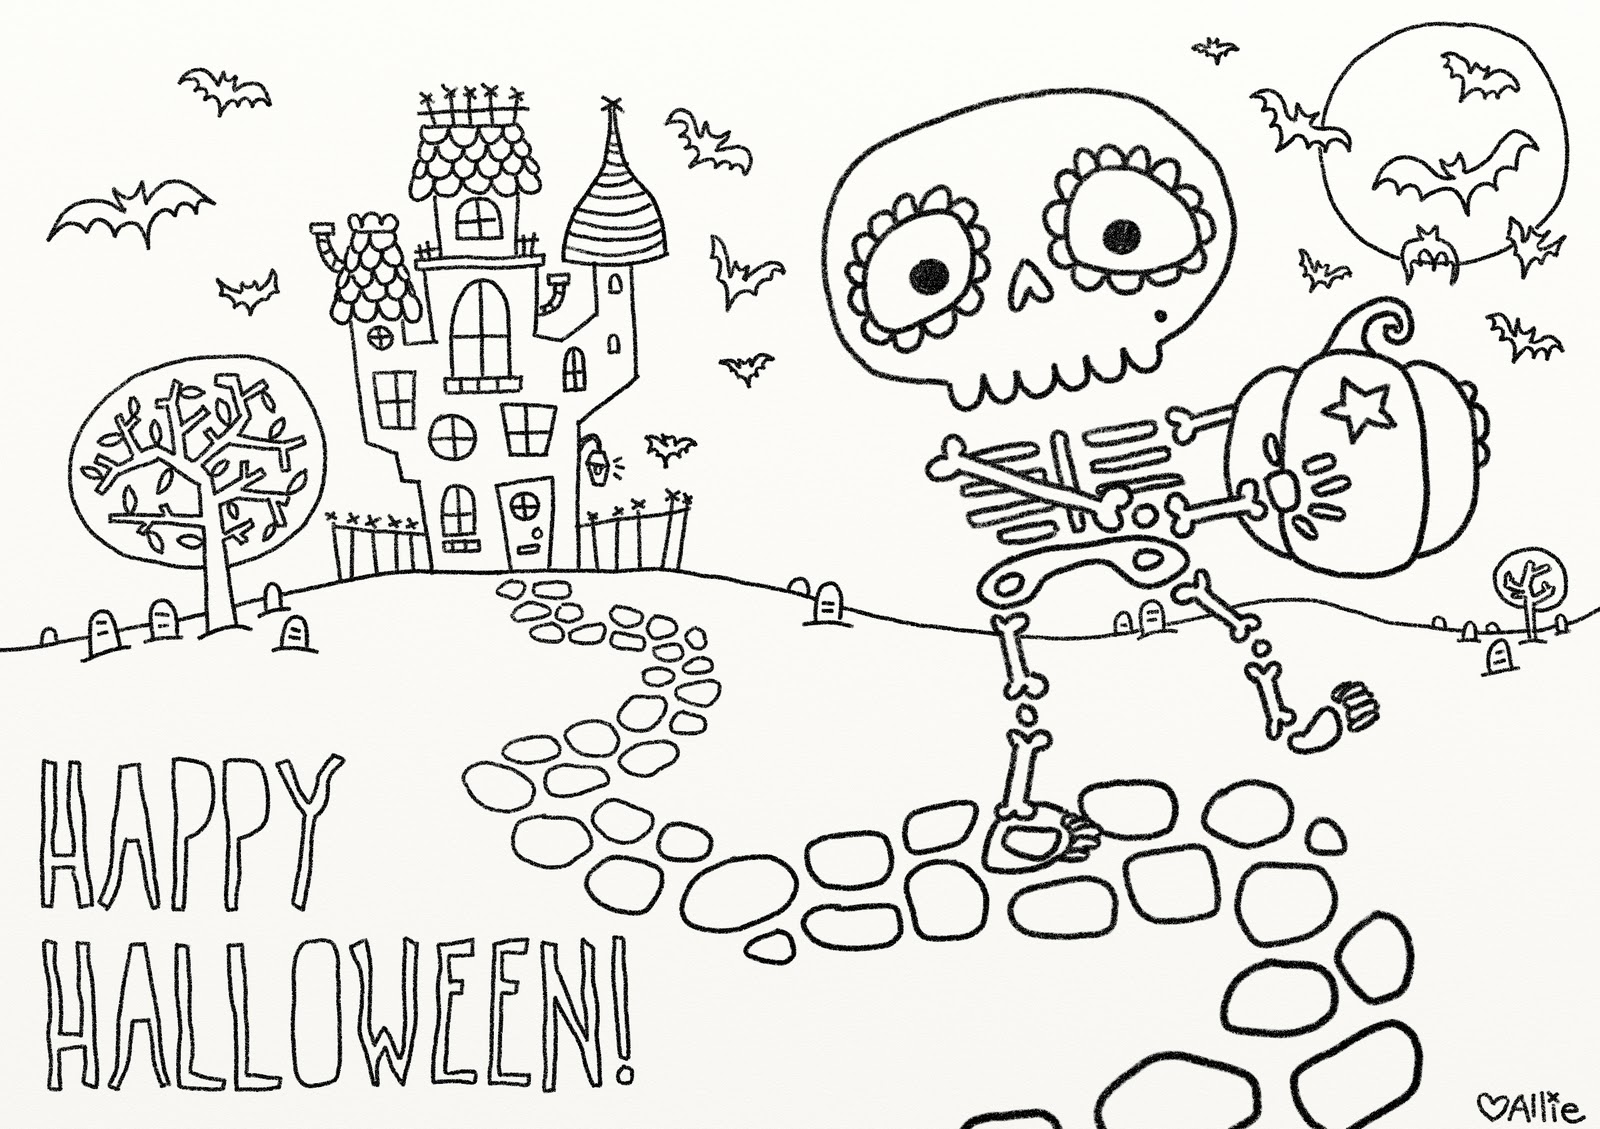 Fun free printable halloween coloring pages